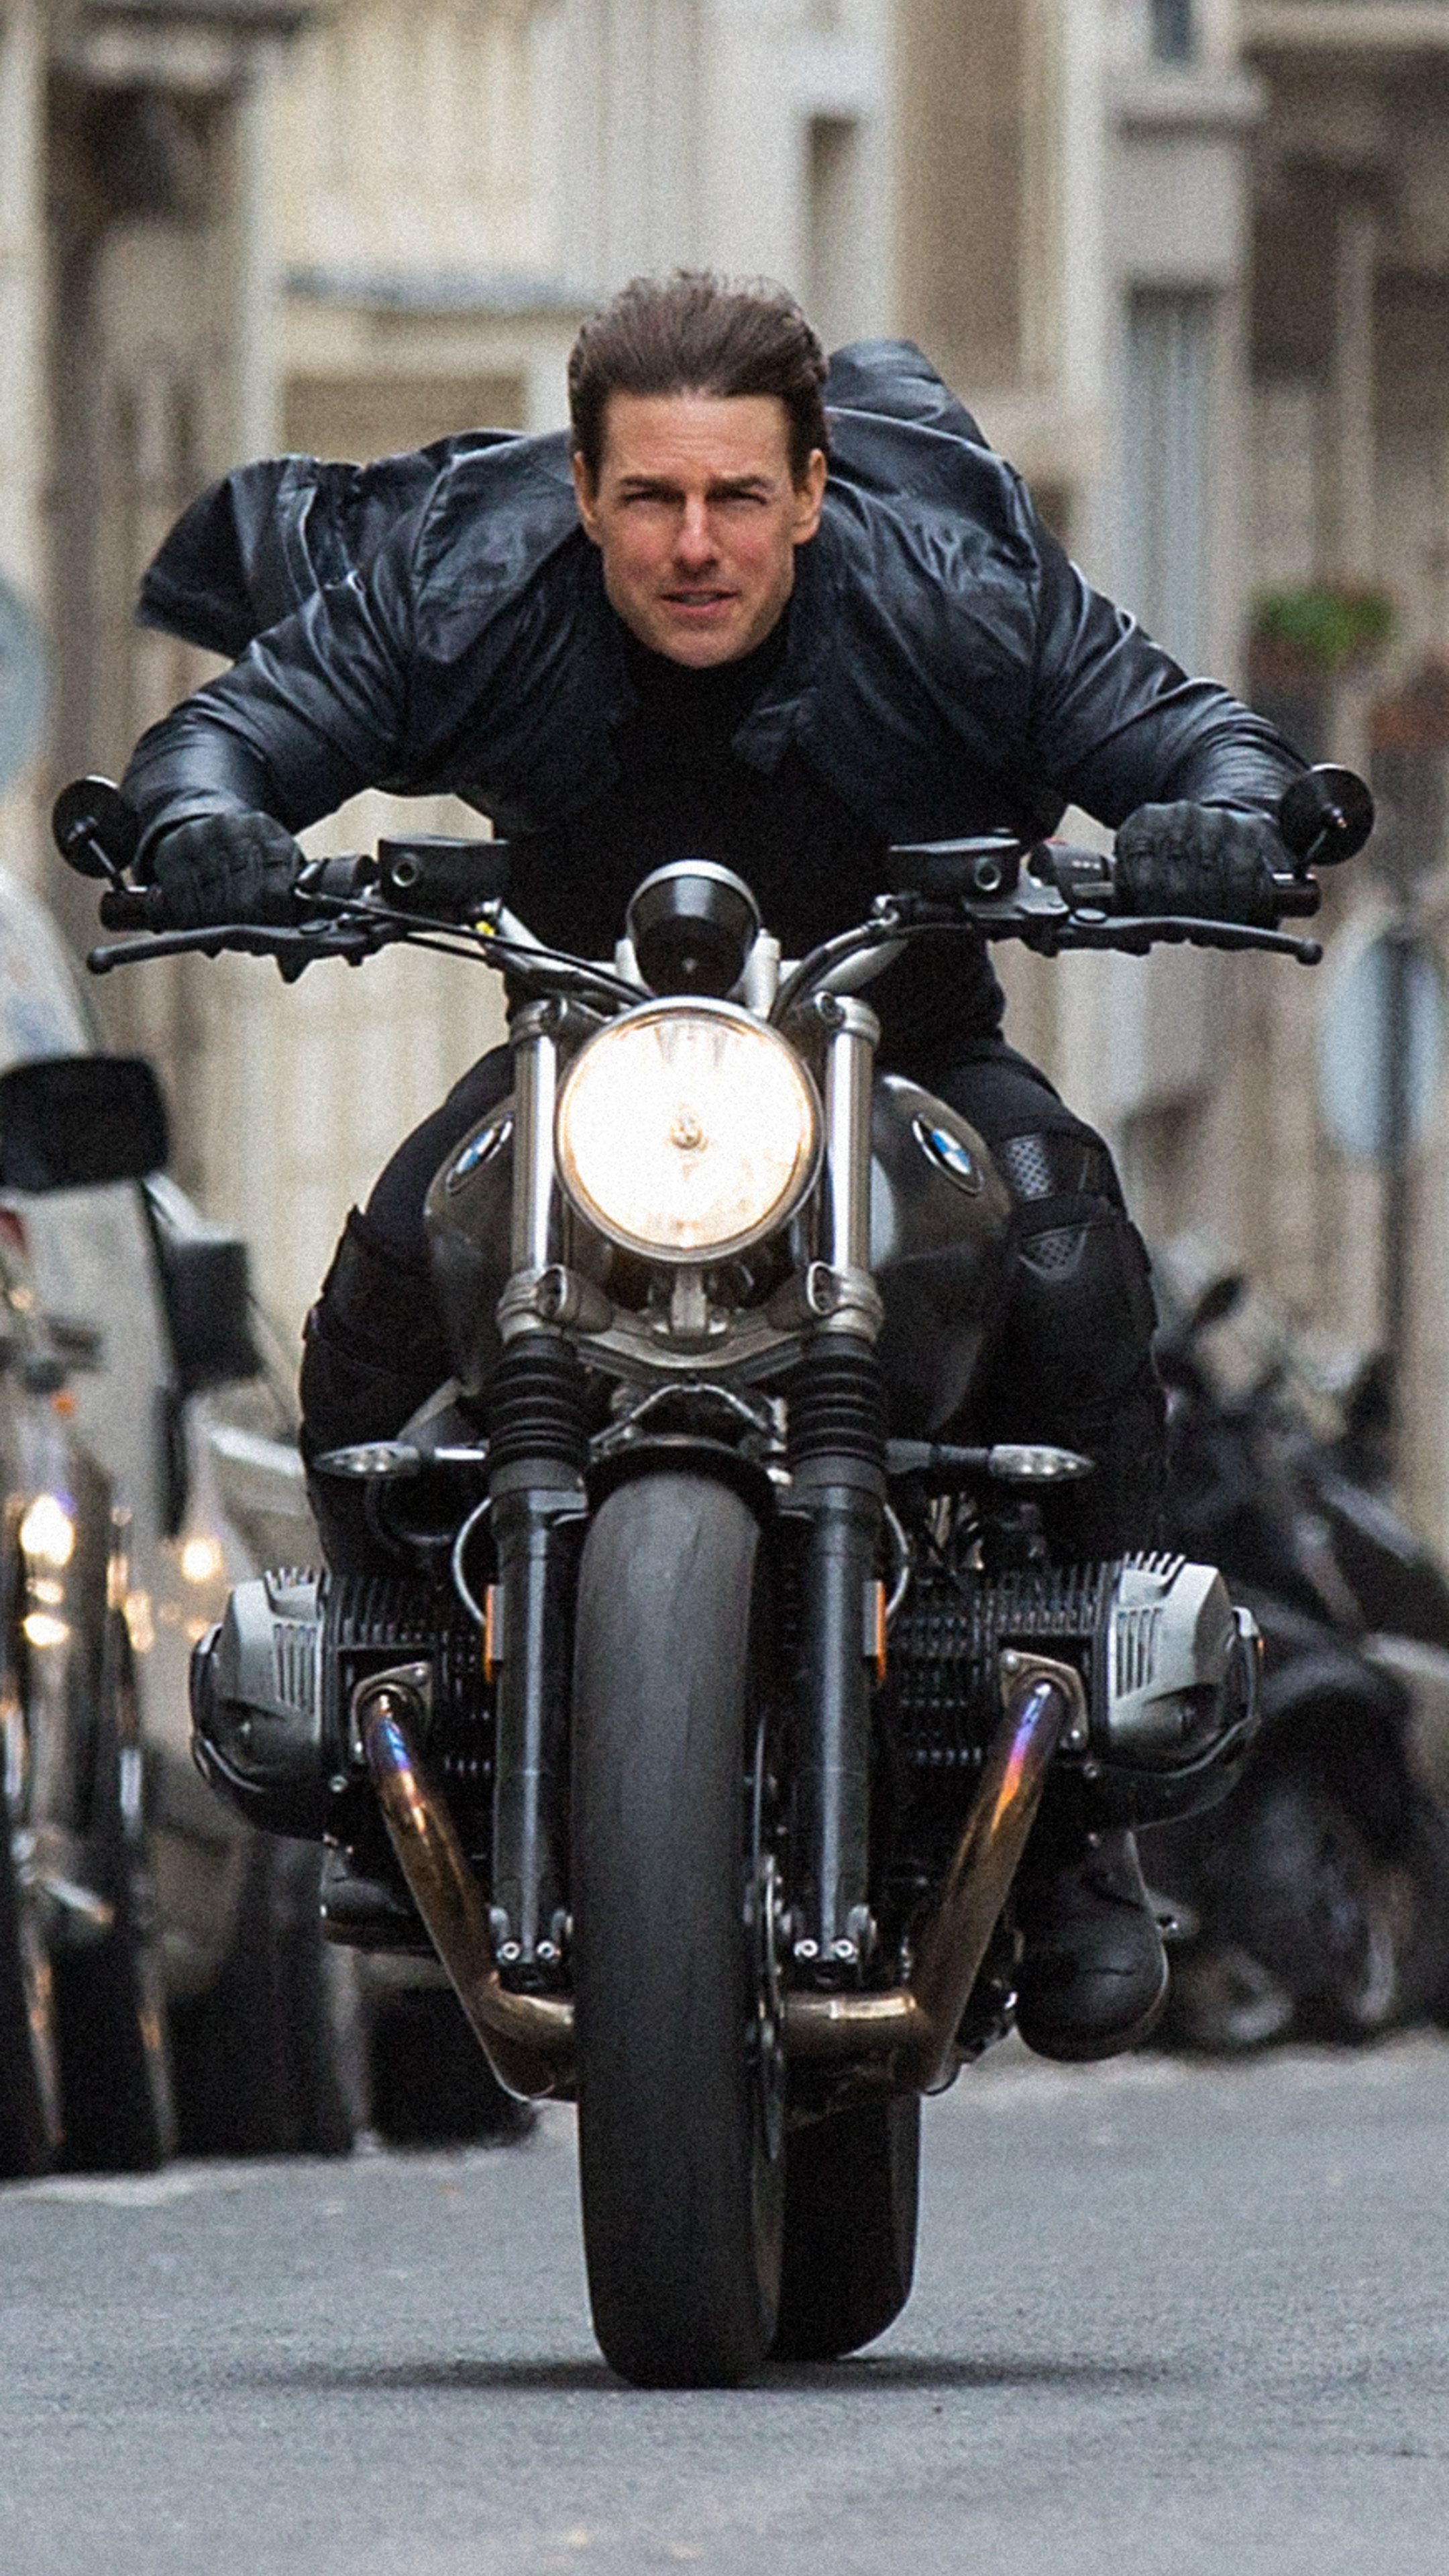 Mission: Impossible Fallout, Tom Cruise as Ethan Hunt, Sony Xperia wallpapers, Captivating performance, 2160x3840 4K Phone